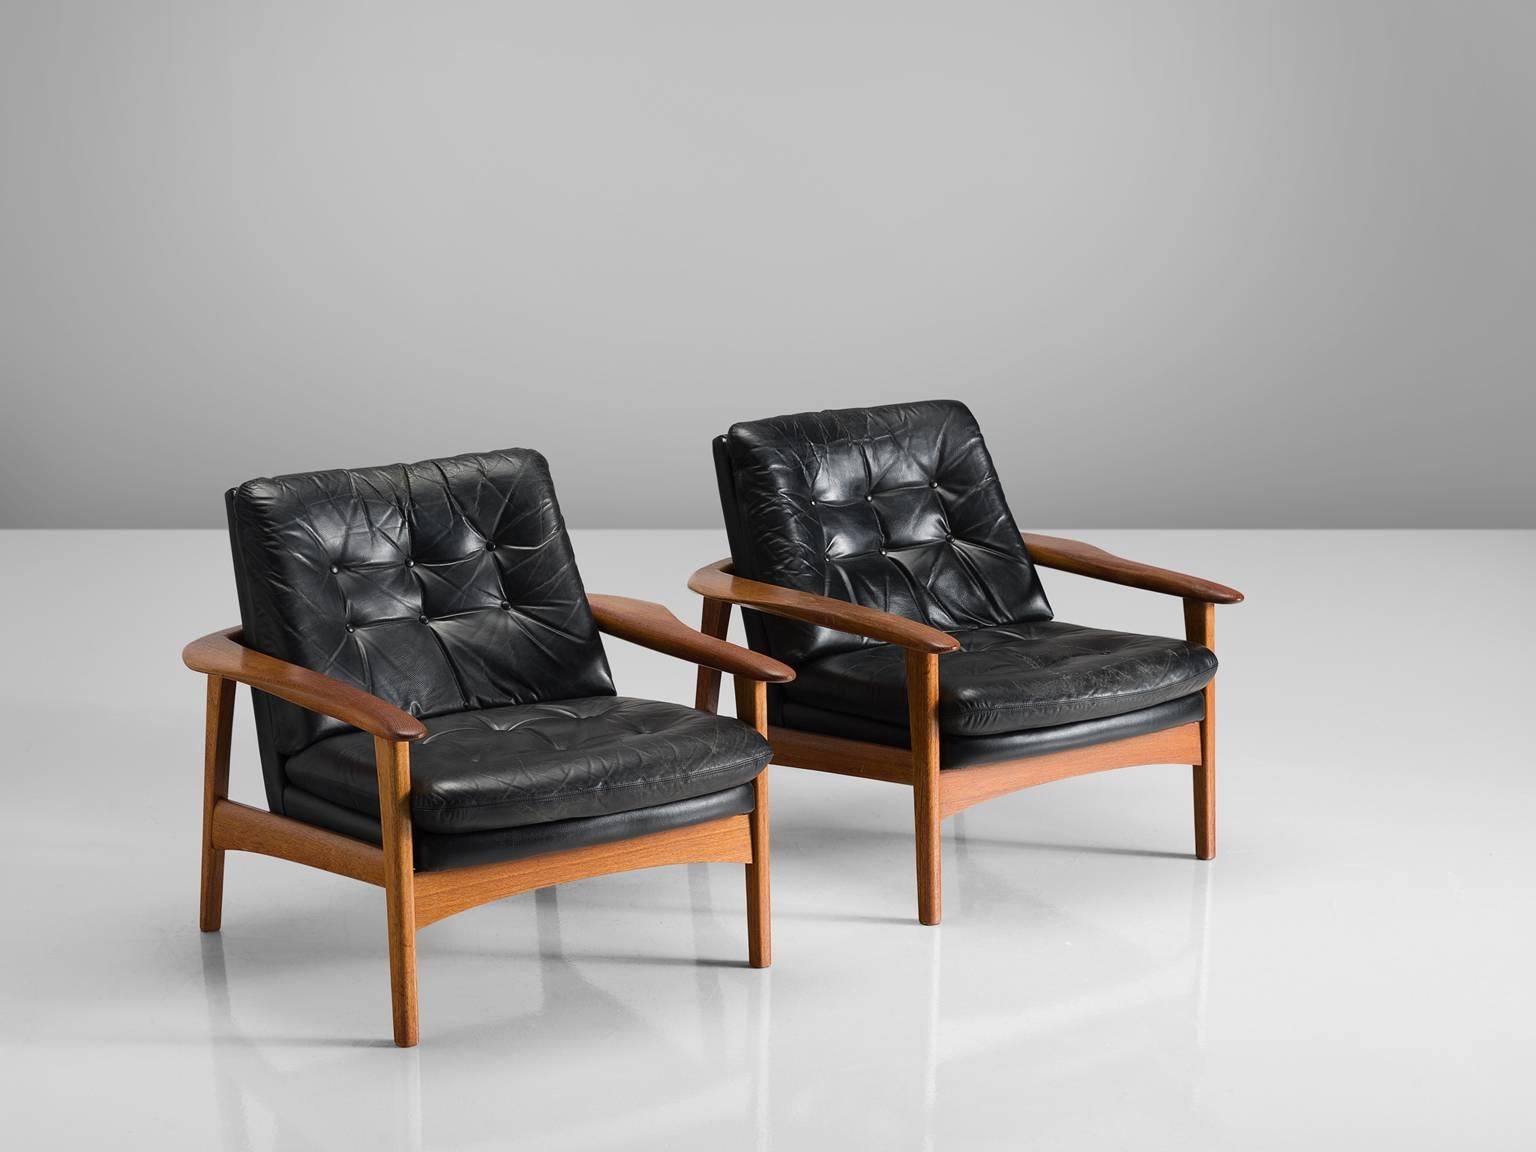 Pair of easy chairs, black leather and teak, Denmark, 1960s.

This set of club like easy chairs feature a teak frame with and a tufted back. The chairs are modest, and their prime feature is their comfortable leather shell. The tufted seat and